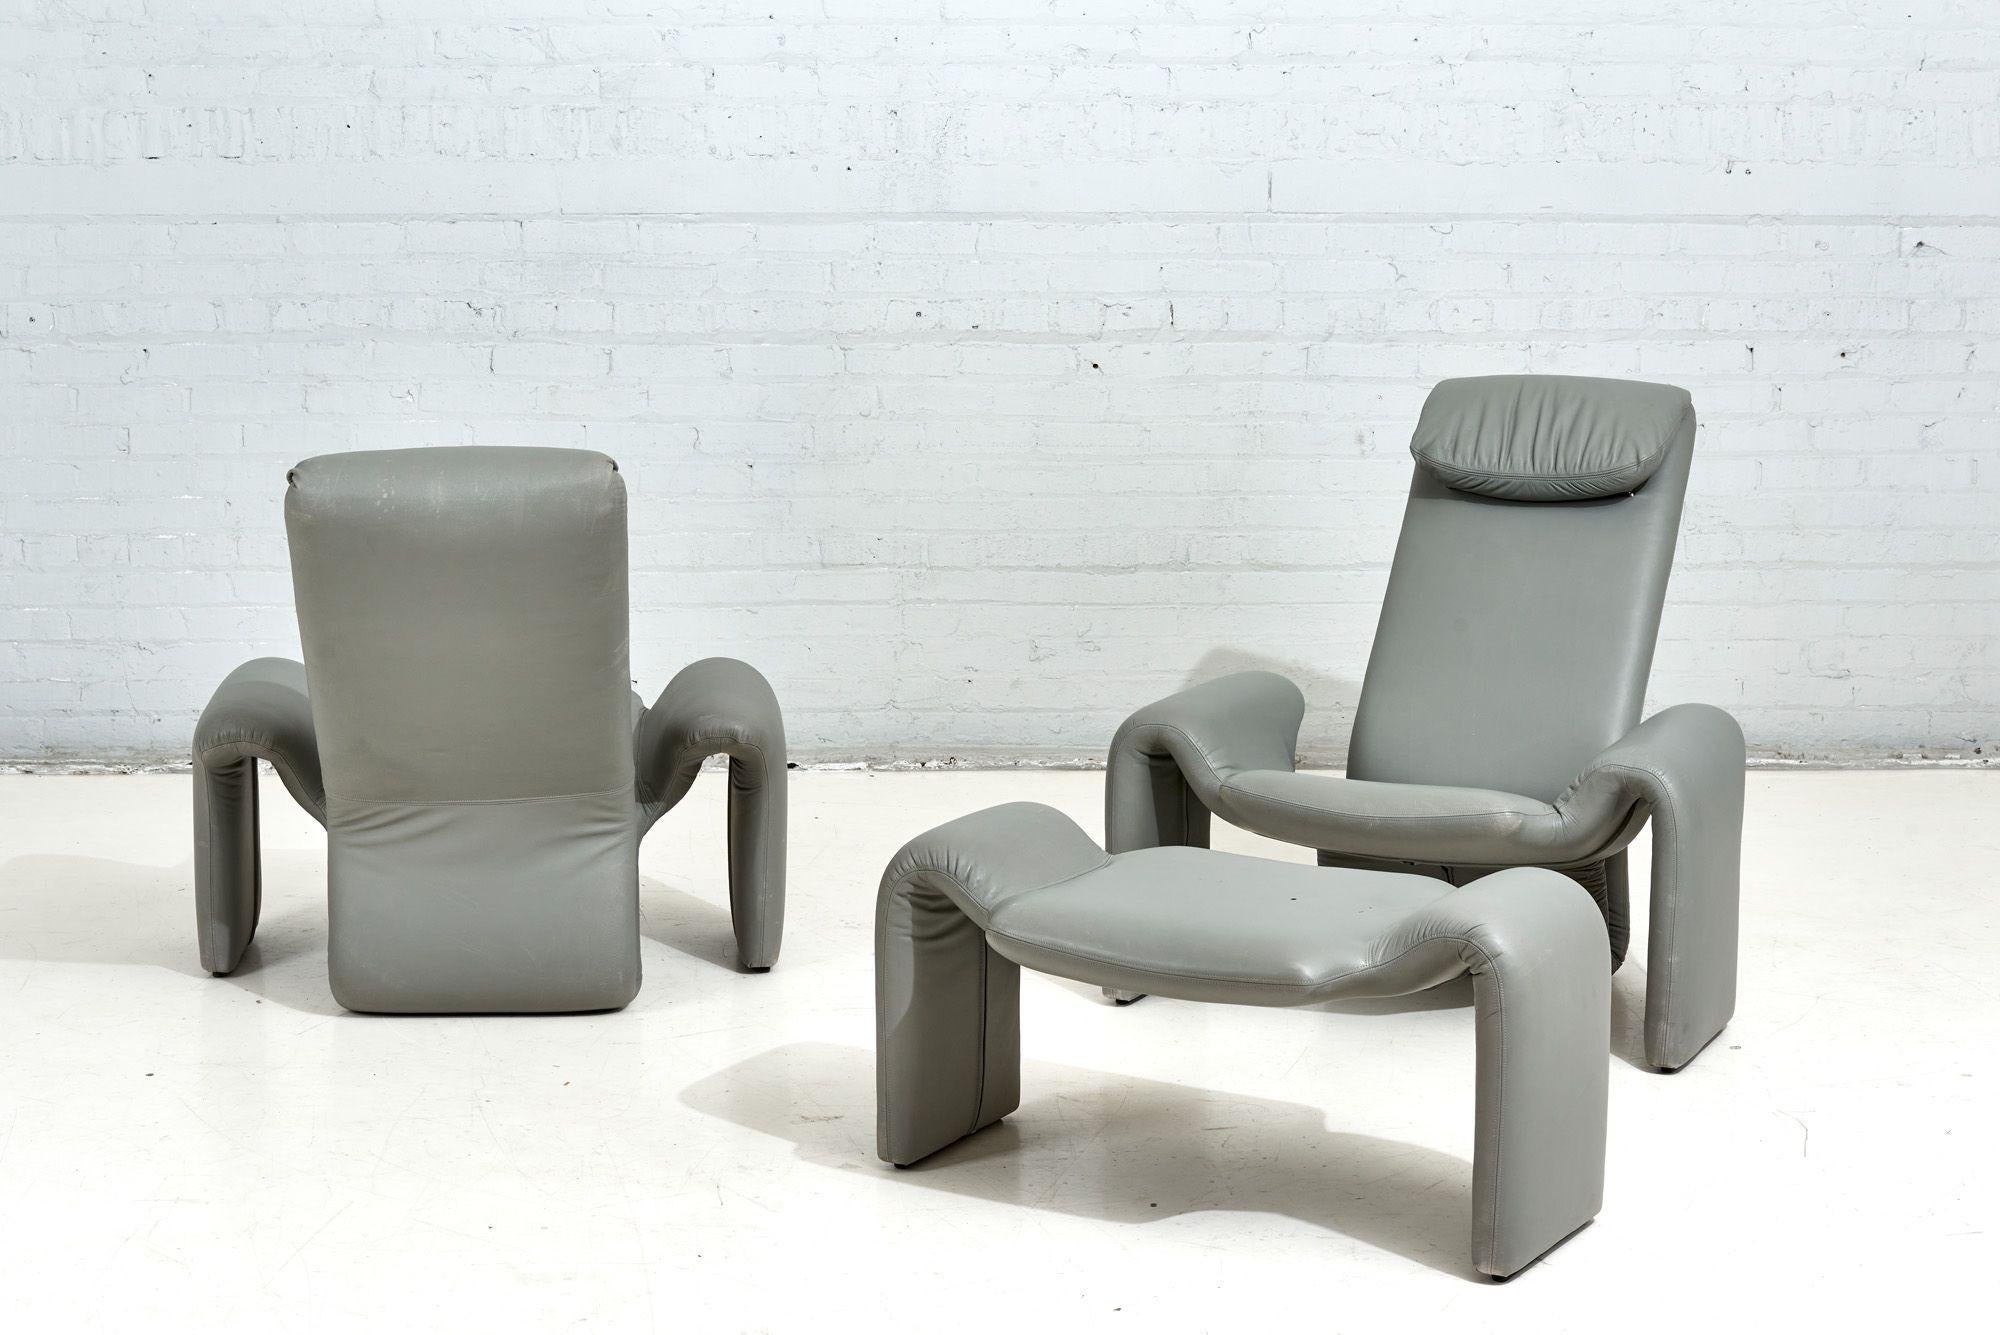 Gray Leather Lounge Chairs and Ottoman by Steve Leonard for Brayton Intl, 1980 For Sale 1